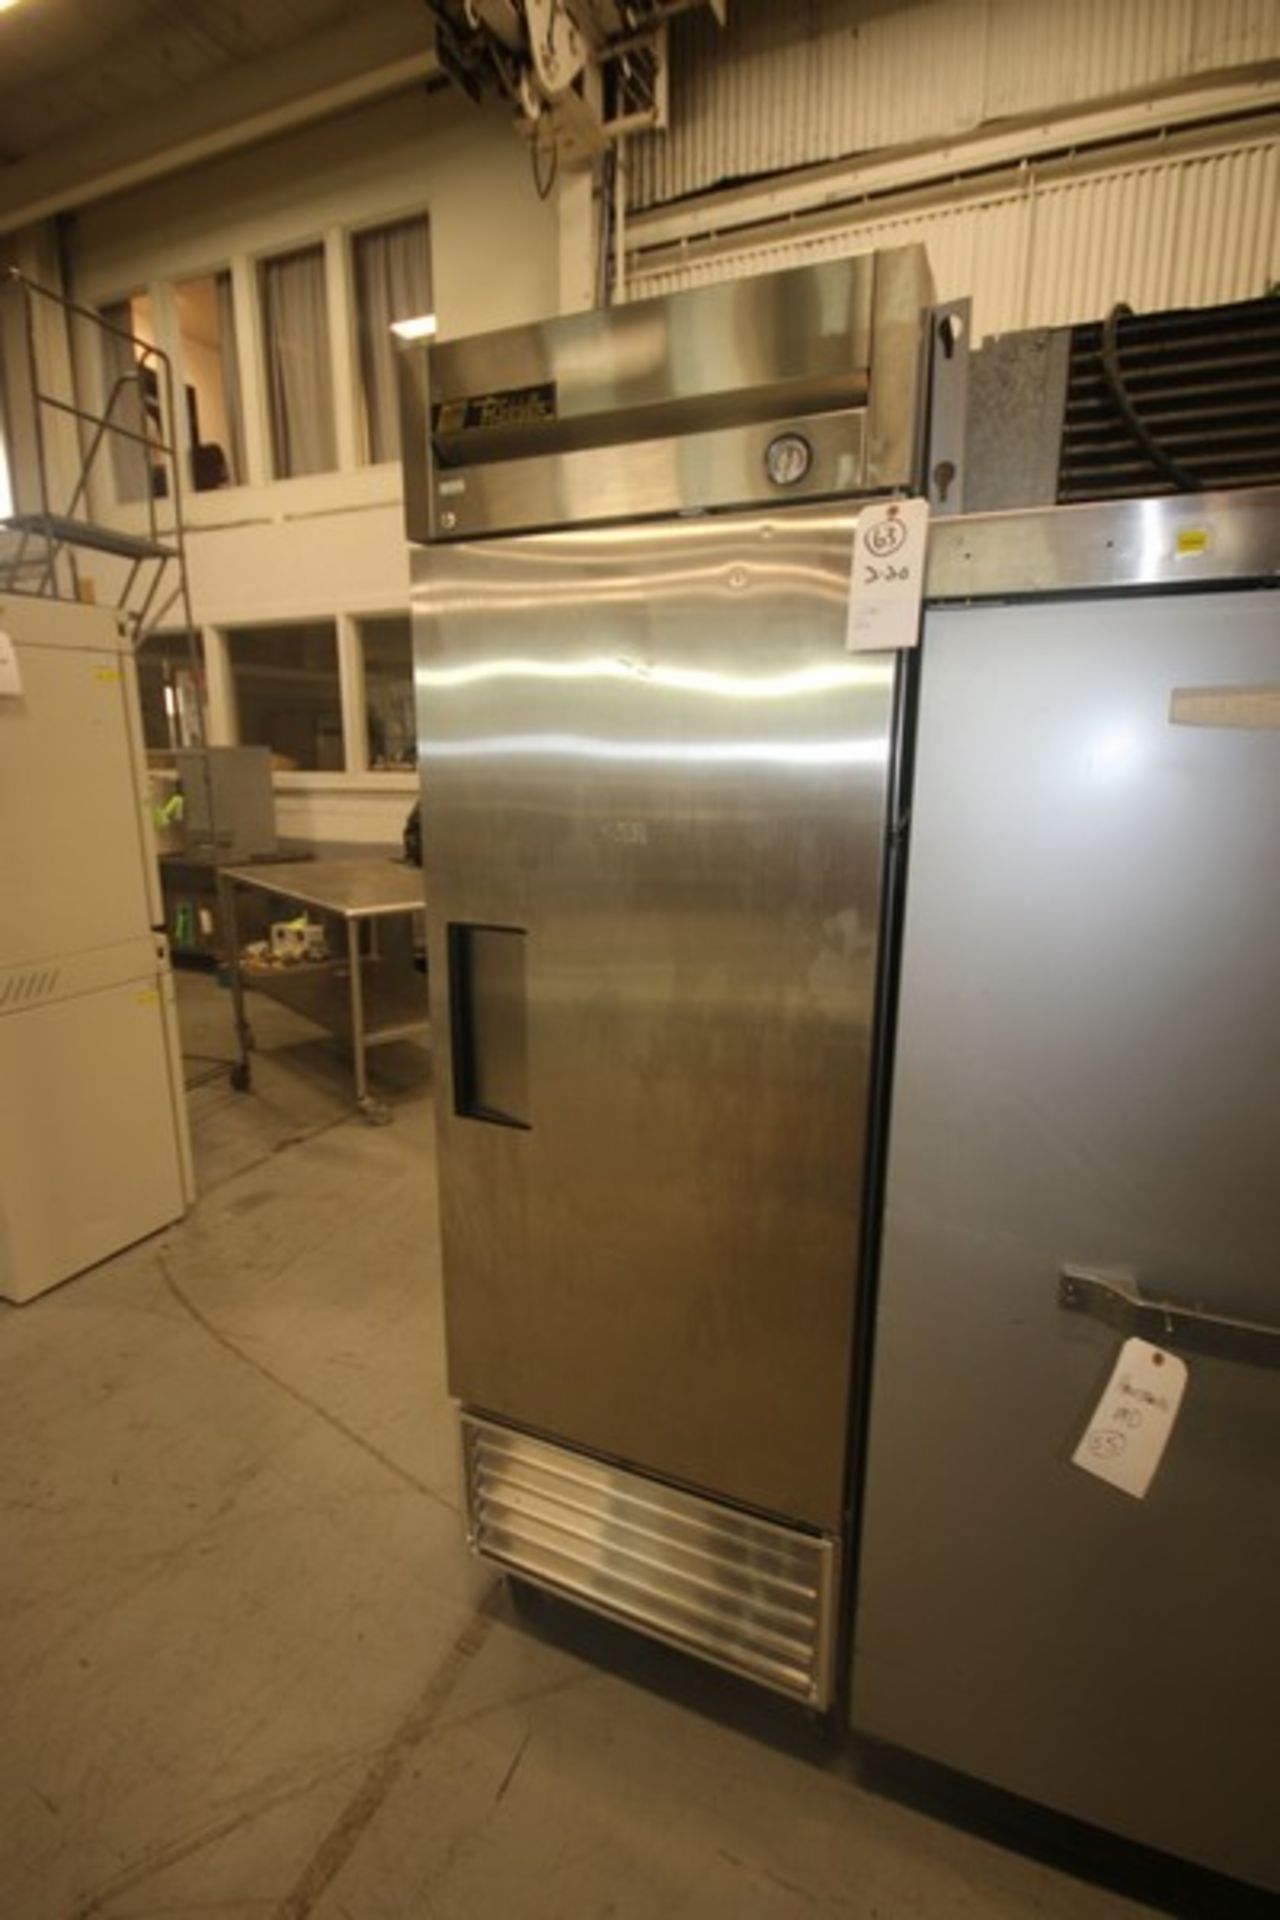 True S/S Upright Freezer,Overall Dims.: Aprox. 29-1/2" L x 27" W x 83" H, Mounted on Portable